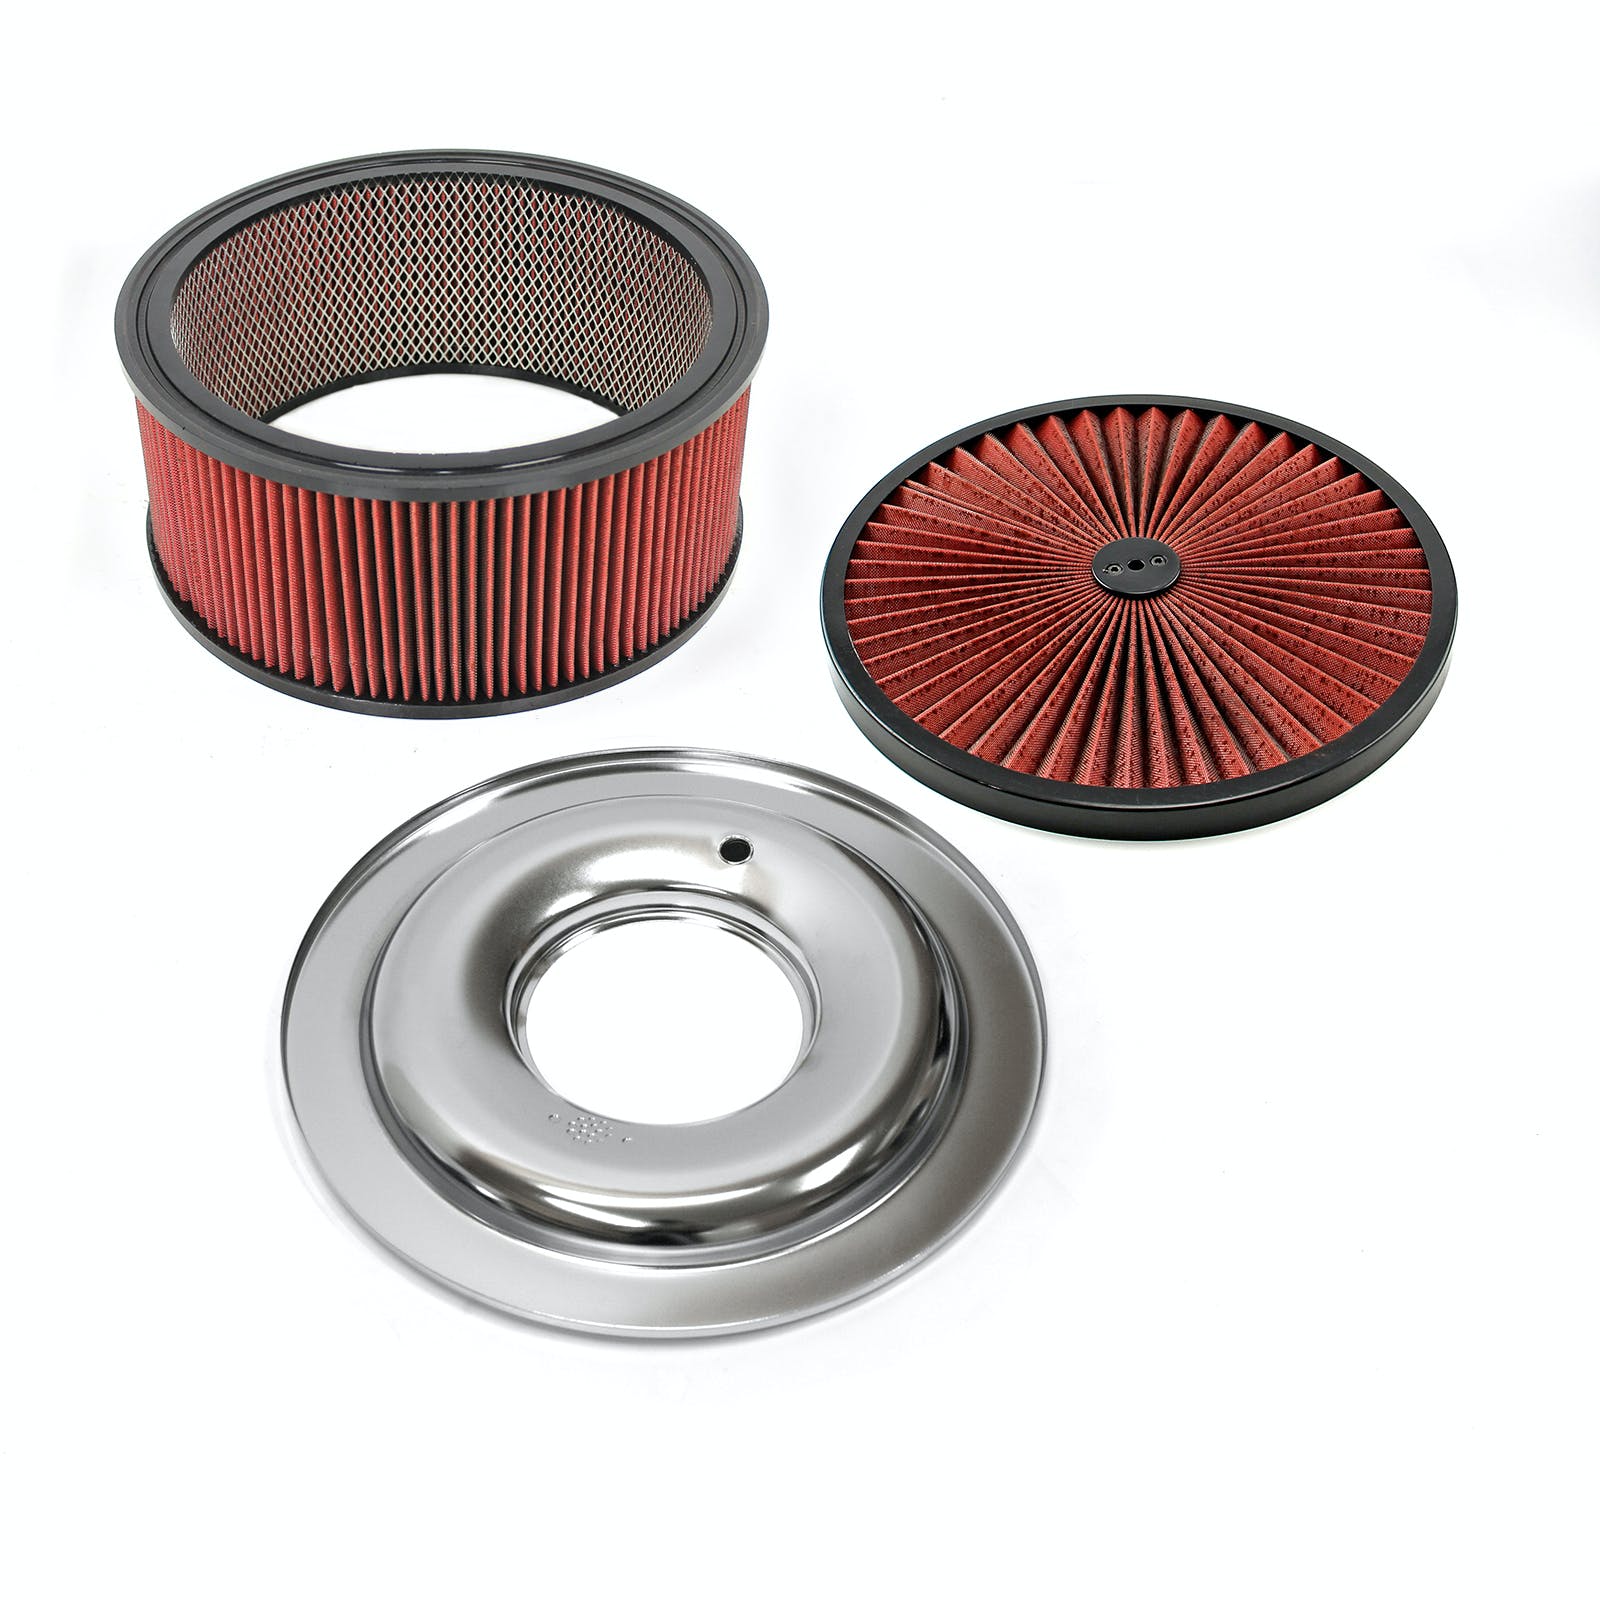 Speedmaster PCE104.1037 14 x 6 Washable Element Extreme Top w/Black Ring Flat Base Air Cleaner Kit